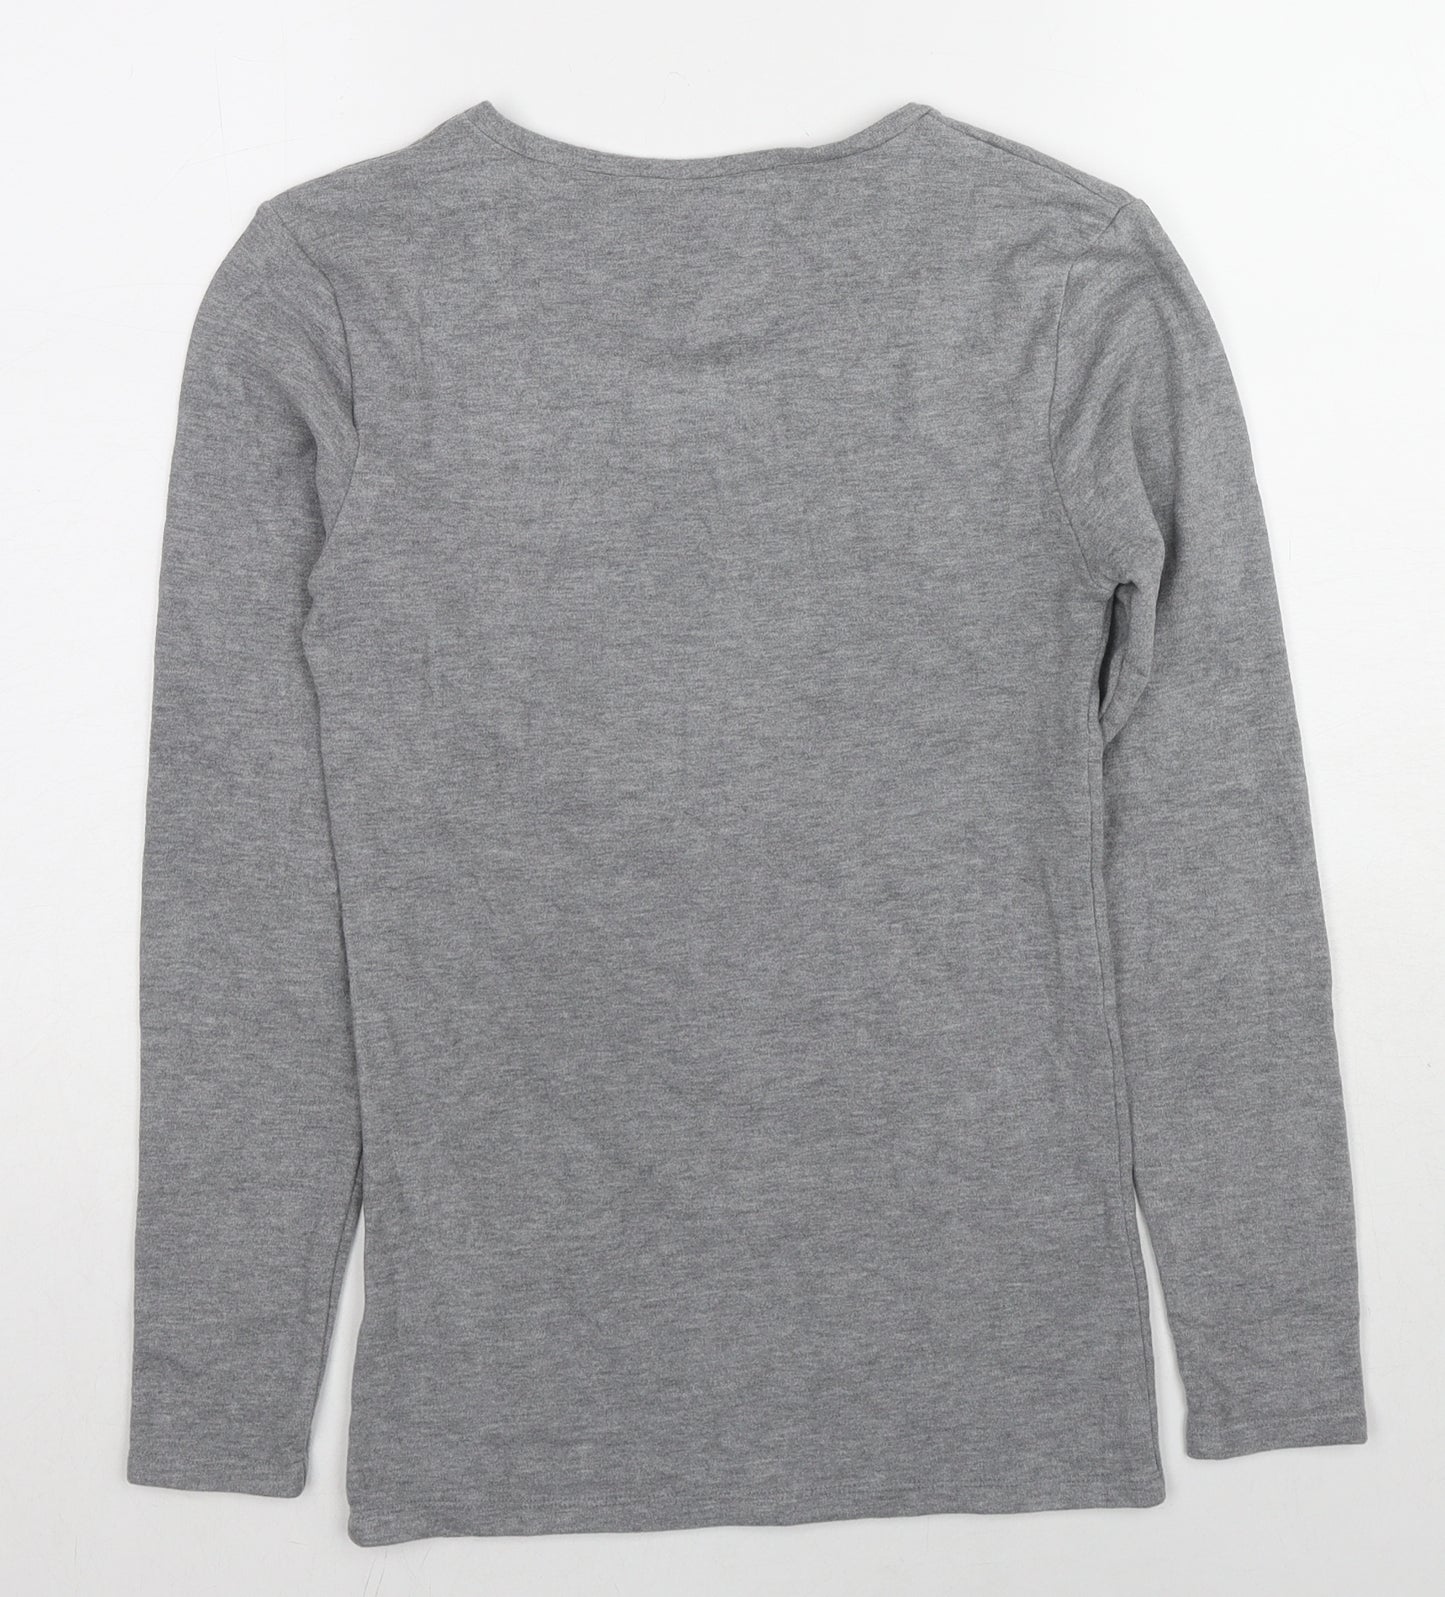 Marks and Spencer Womens Grey Cotton Basic T-Shirt Size 12 Round Neck